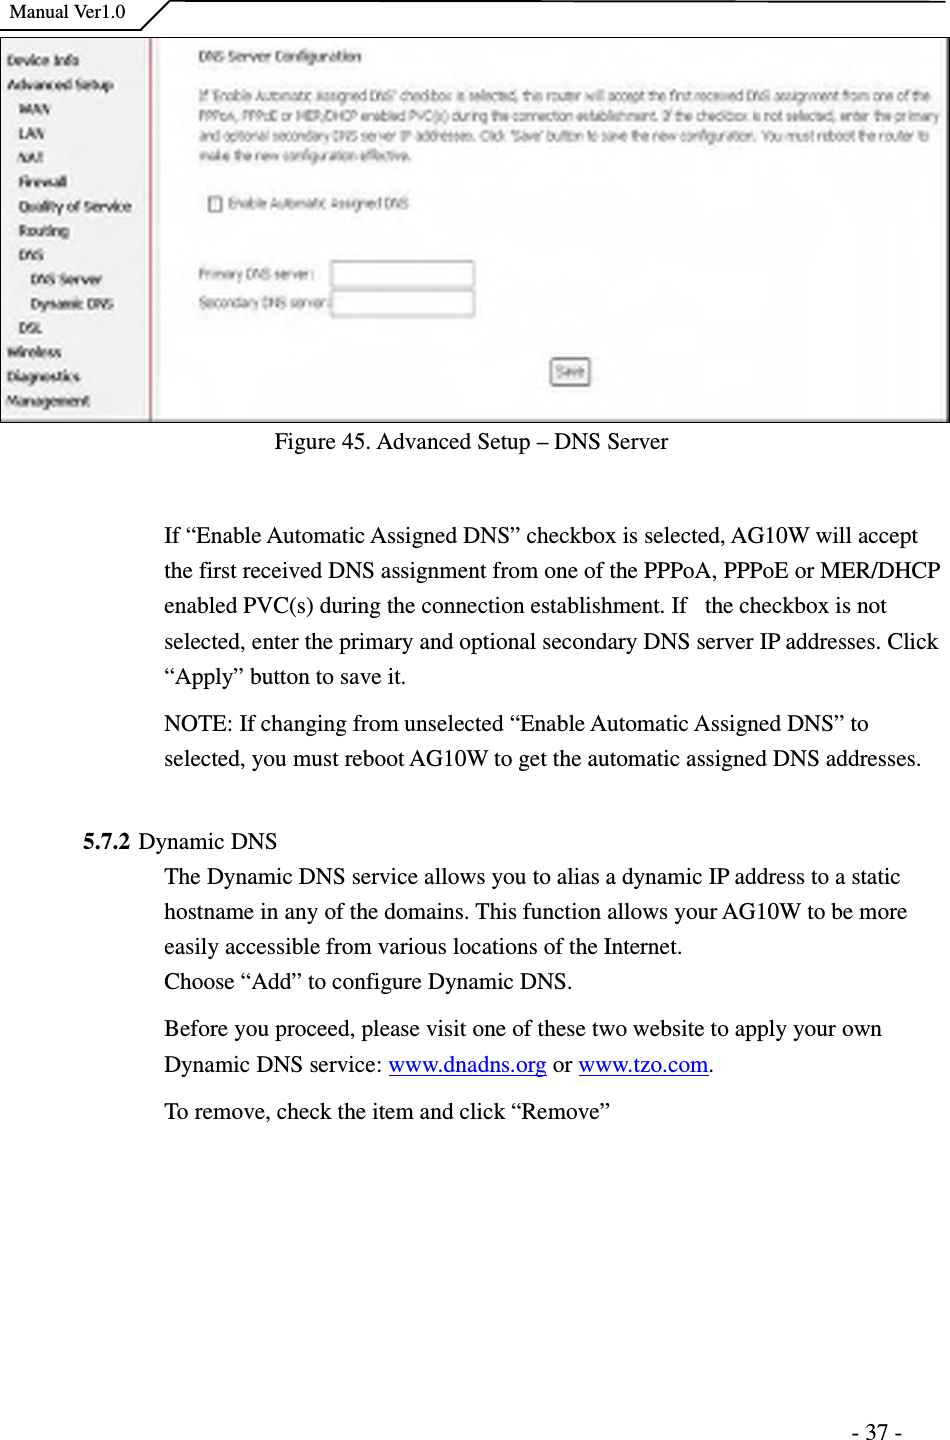    Manual Ver1.0                                                                      - 37 - Figure 45. Advanced Setup – DNS Server  If “Enable Automatic Assigned DNS” checkbox is selected, AG10W will accept the first received DNS assignment from one of the PPPoA, PPPoE or MER/DHCP enabled PVC(s) during the connection establishment. If   the checkbox is not selected, enter the primary and optional secondary DNS server IP addresses. Click “Apply” button to save it. NOTE: If changing from unselected “Enable Automatic Assigned DNS” to selected, you must reboot AG10W to get the automatic assigned DNS addresses.  5.7.2 Dynamic DNS The Dynamic DNS service allows you to alias a dynamic IP address to a static hostname in any of the domains. This function allows your AG10W to be more easily accessible from various locations of the Internet. Choose “Add” to configure Dynamic DNS. Before you proceed, please visit one of these two website to apply your own Dynamic DNS service: www.dnadns.org or www.tzo.com. To remove, check the item and click “Remove” 